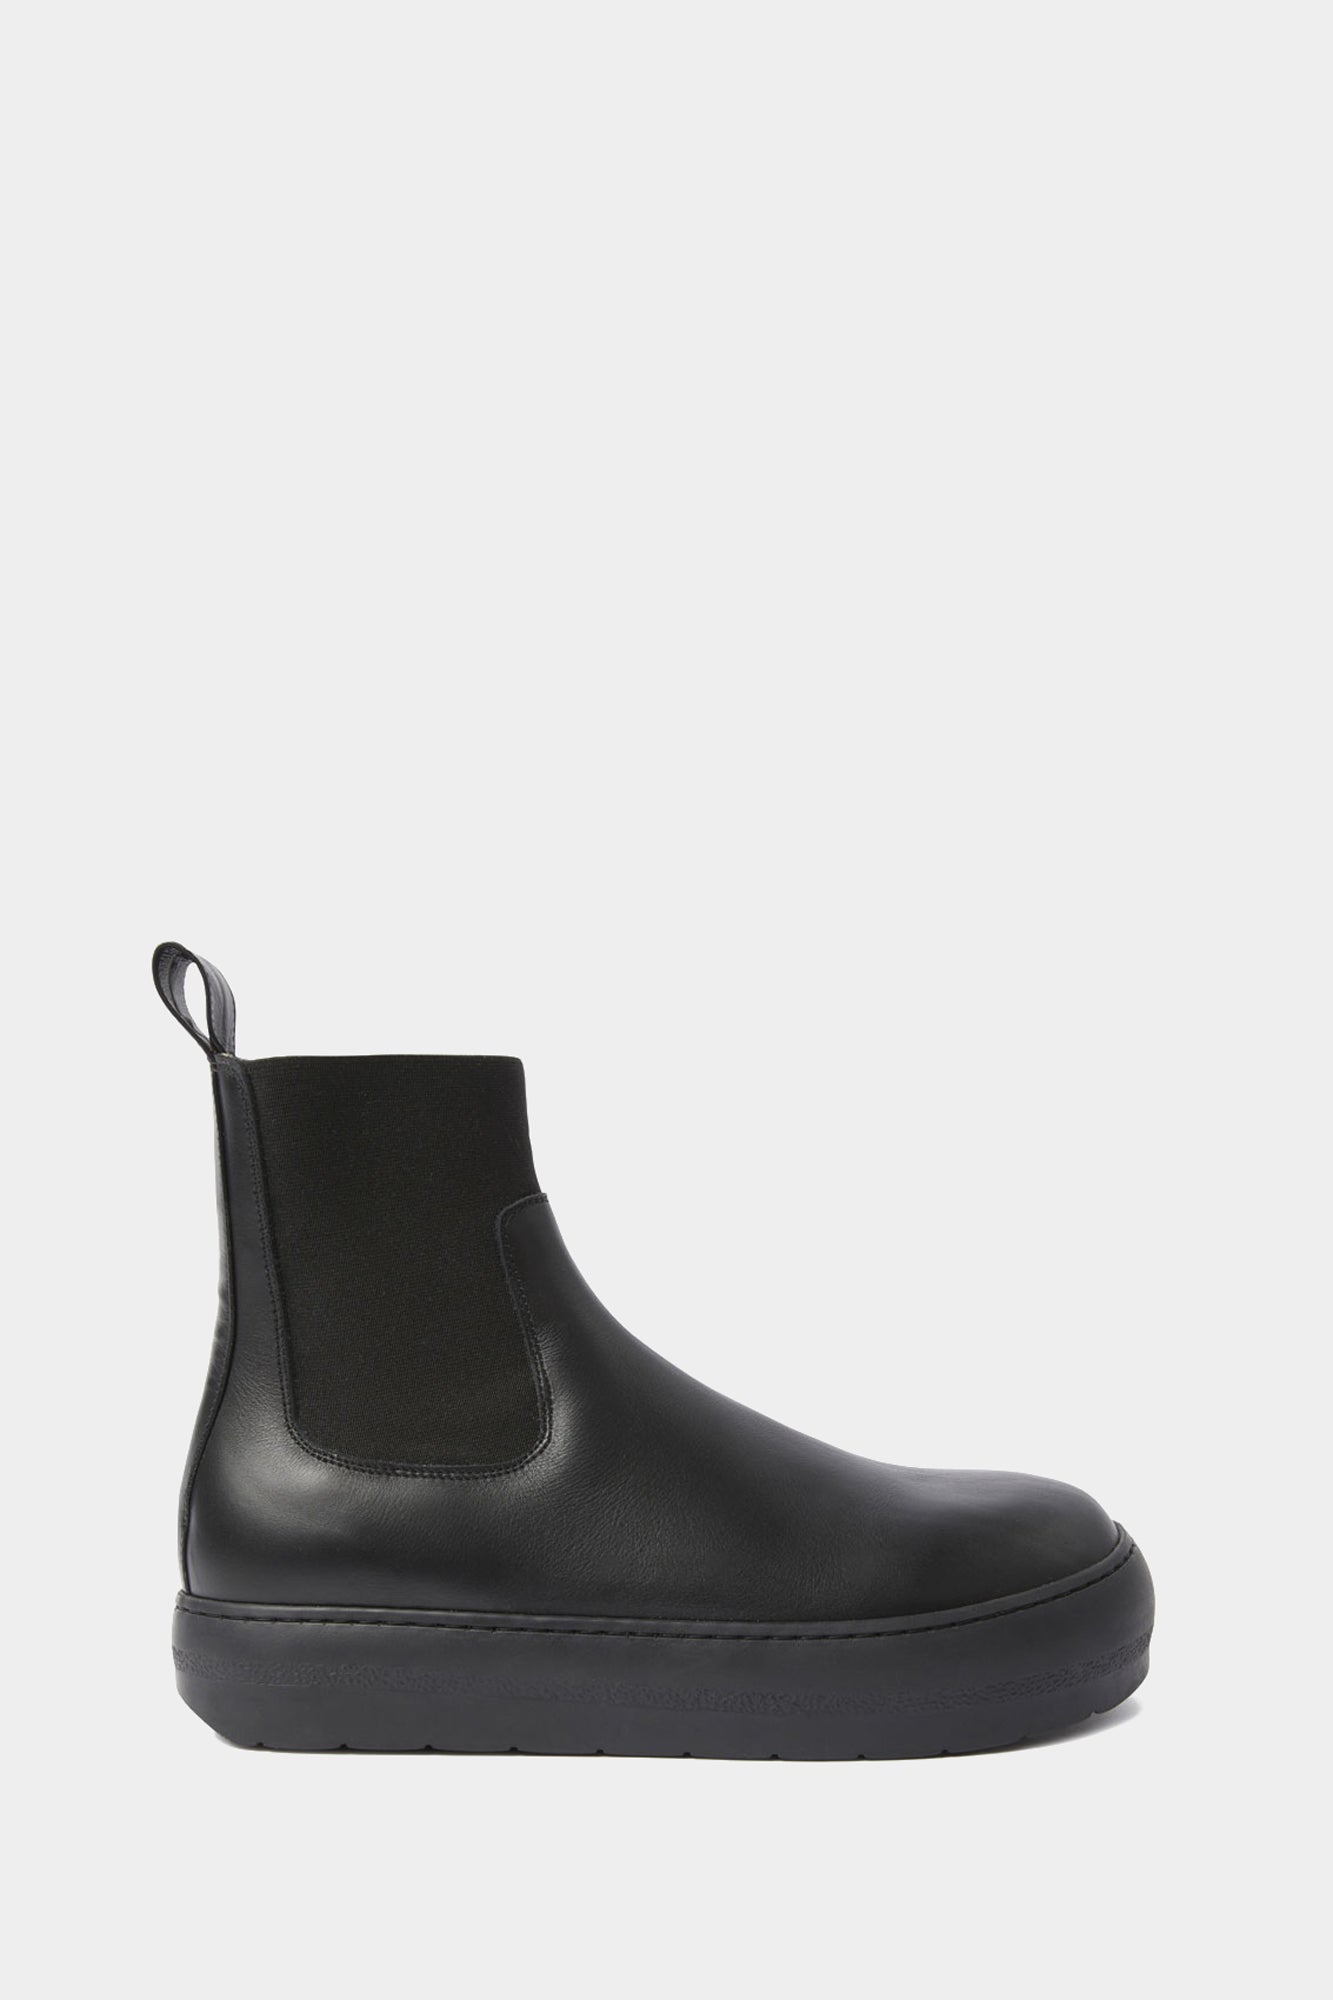 DREAMY ANKLE BOOTS / leather / total black – SUNNEI